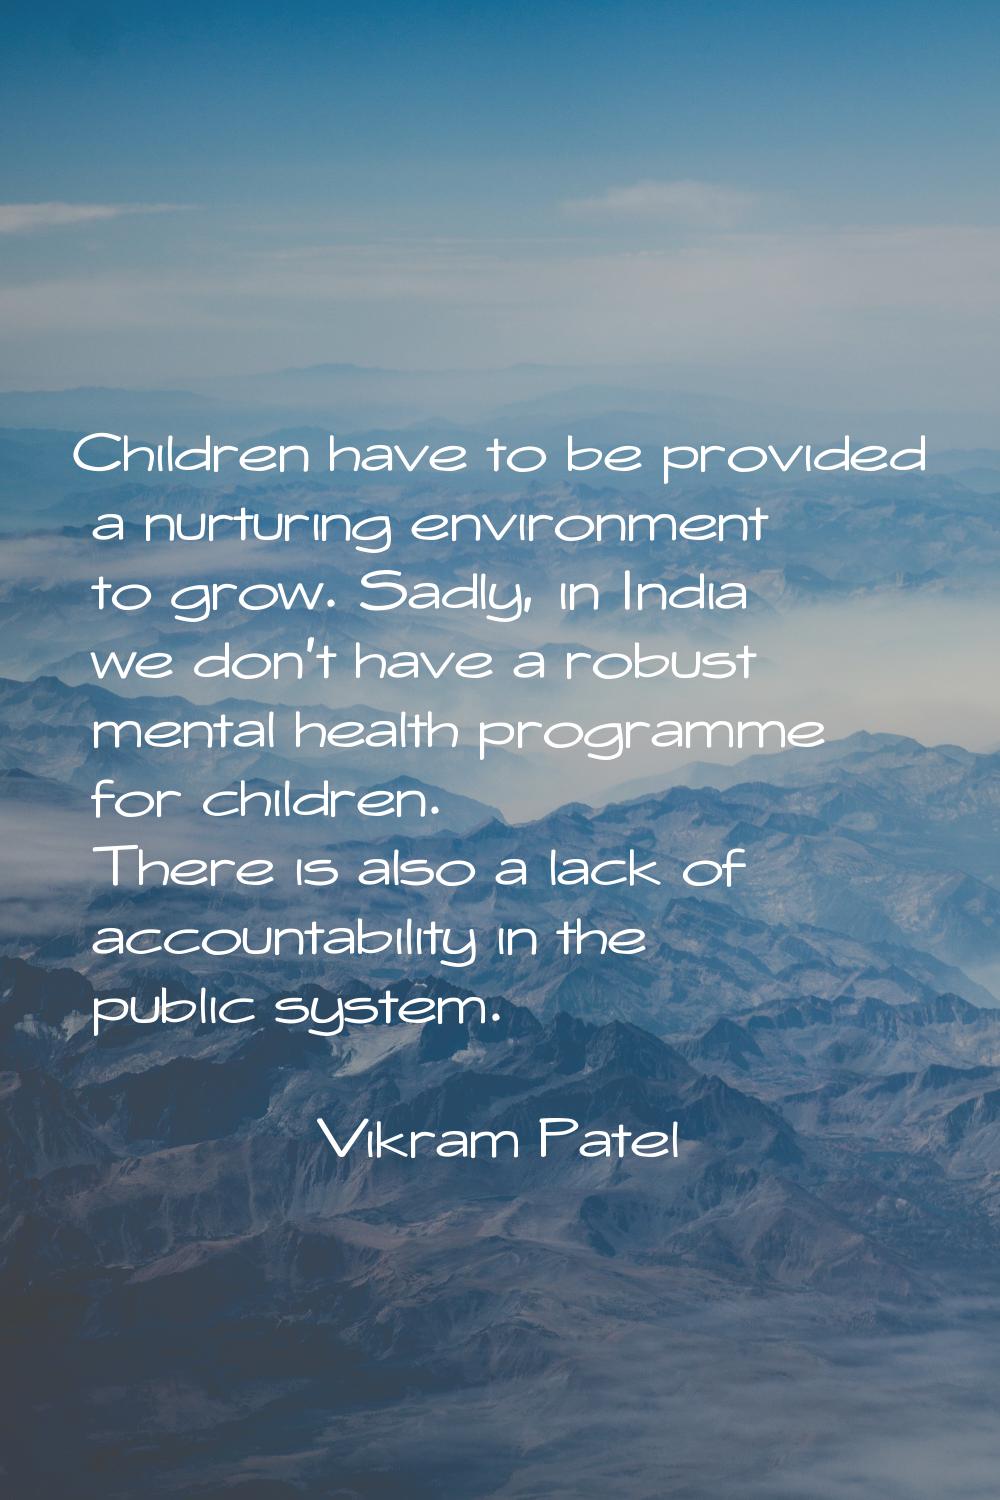 Children have to be provided a nurturing environment to grow. Sadly, in India we don't have a robus